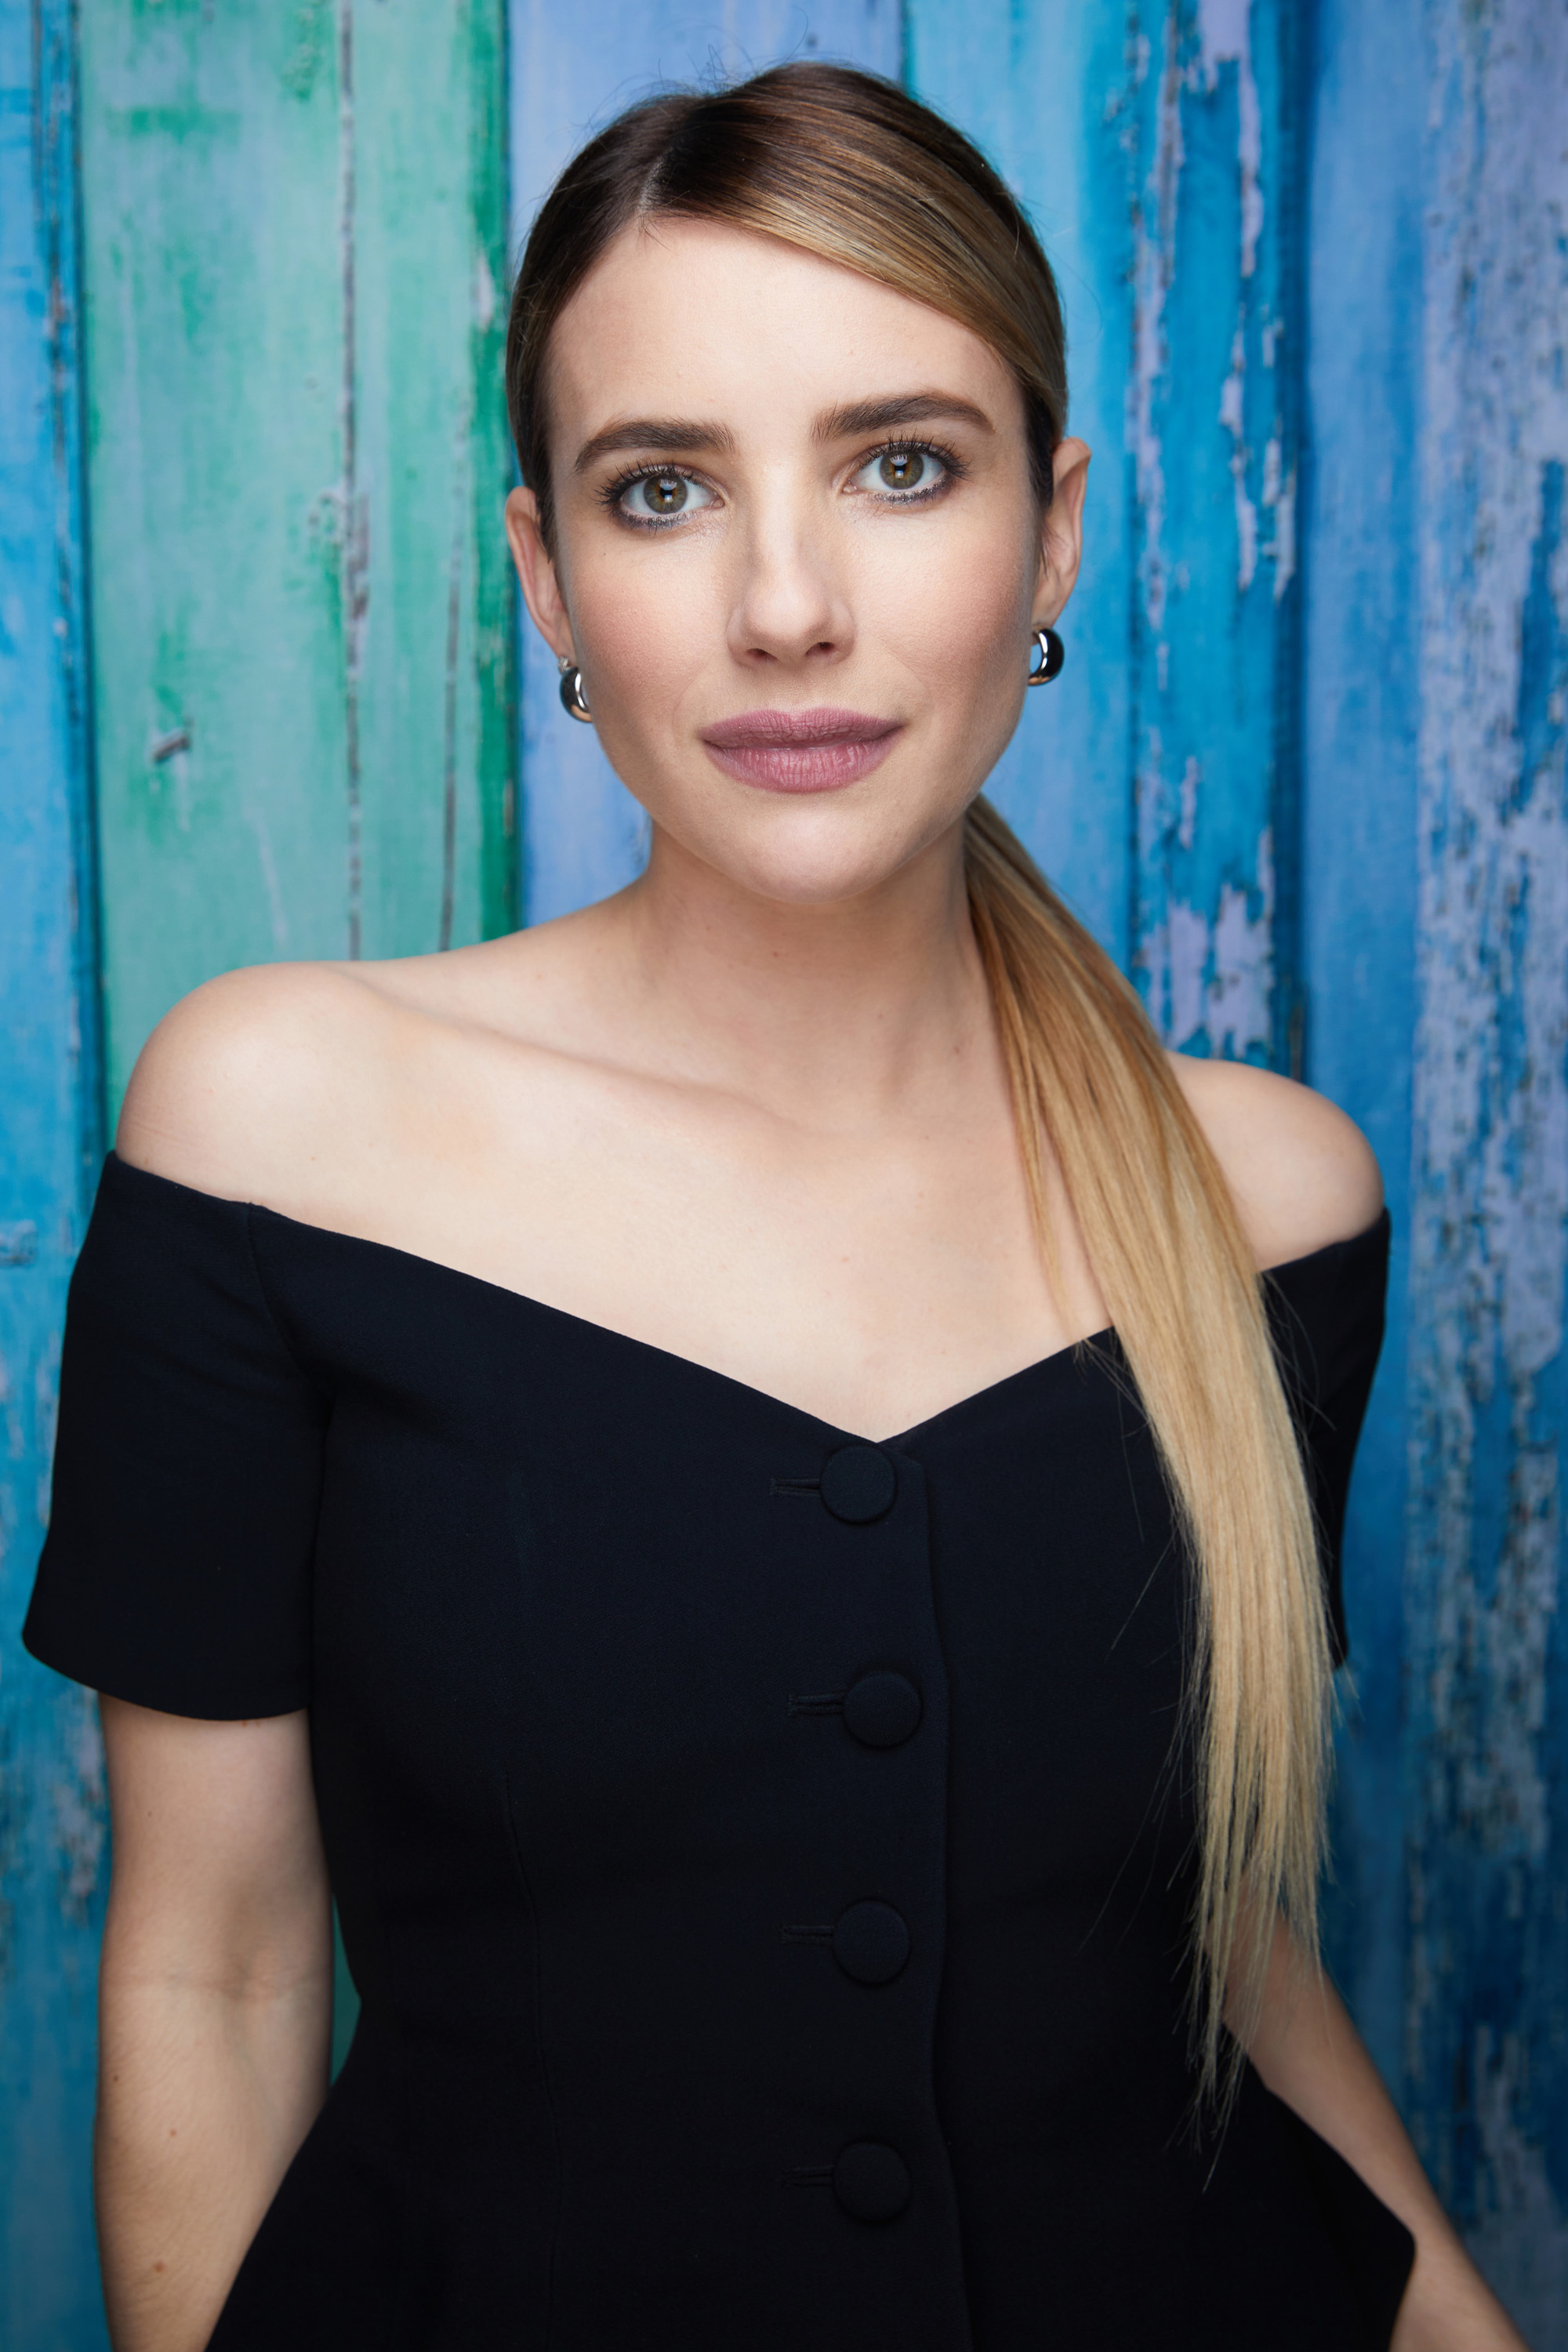 Emma Roberts poses in an off-shoulder black dress against a textured blue and green background